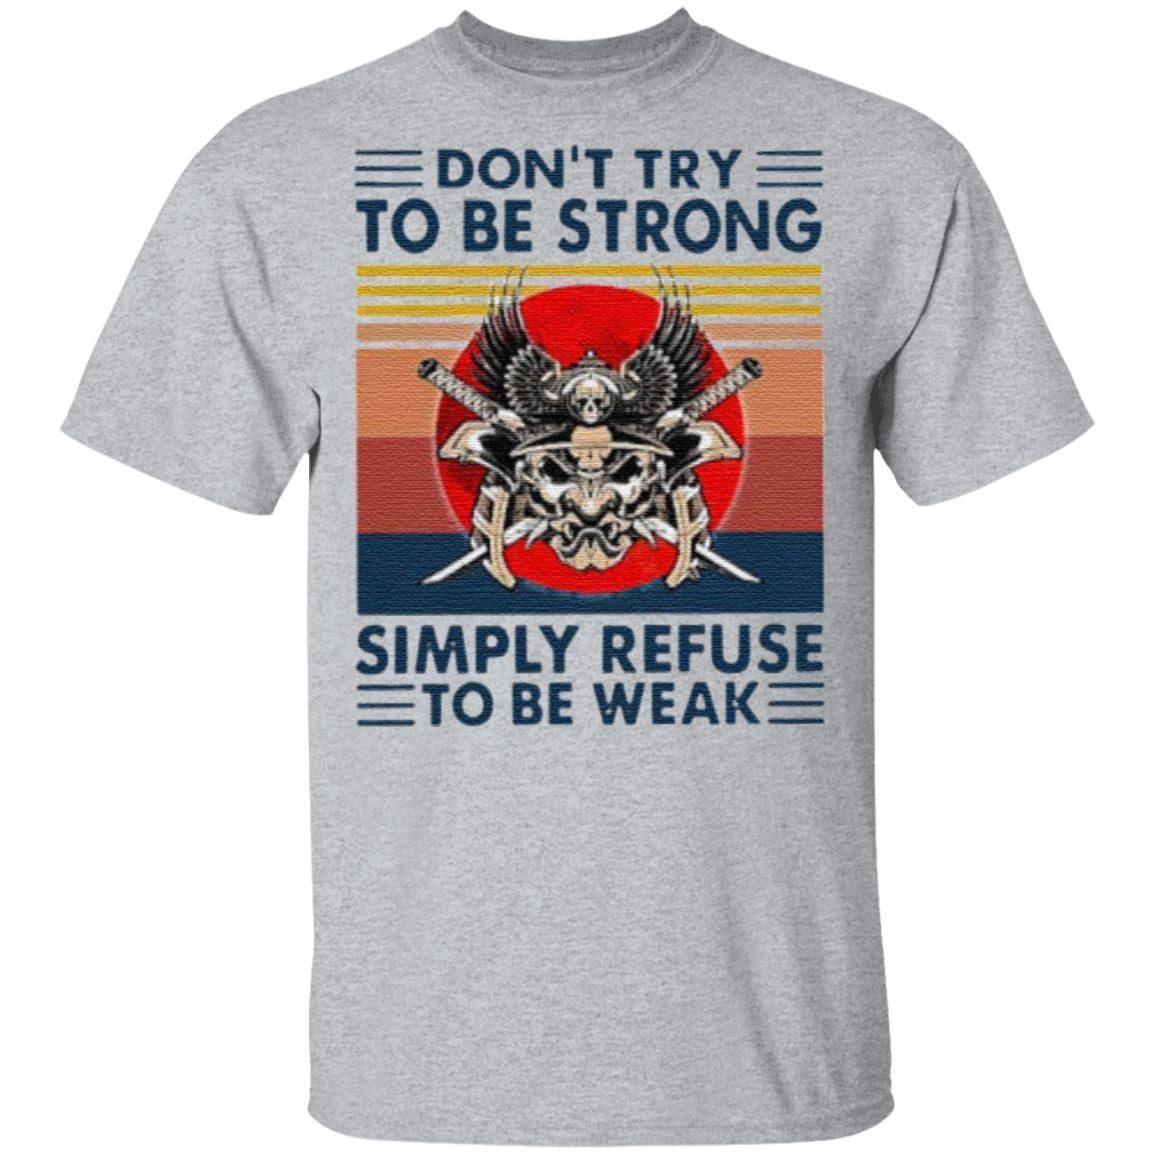 Don’t try to be strong simply refuse to be weak vintage t shirt